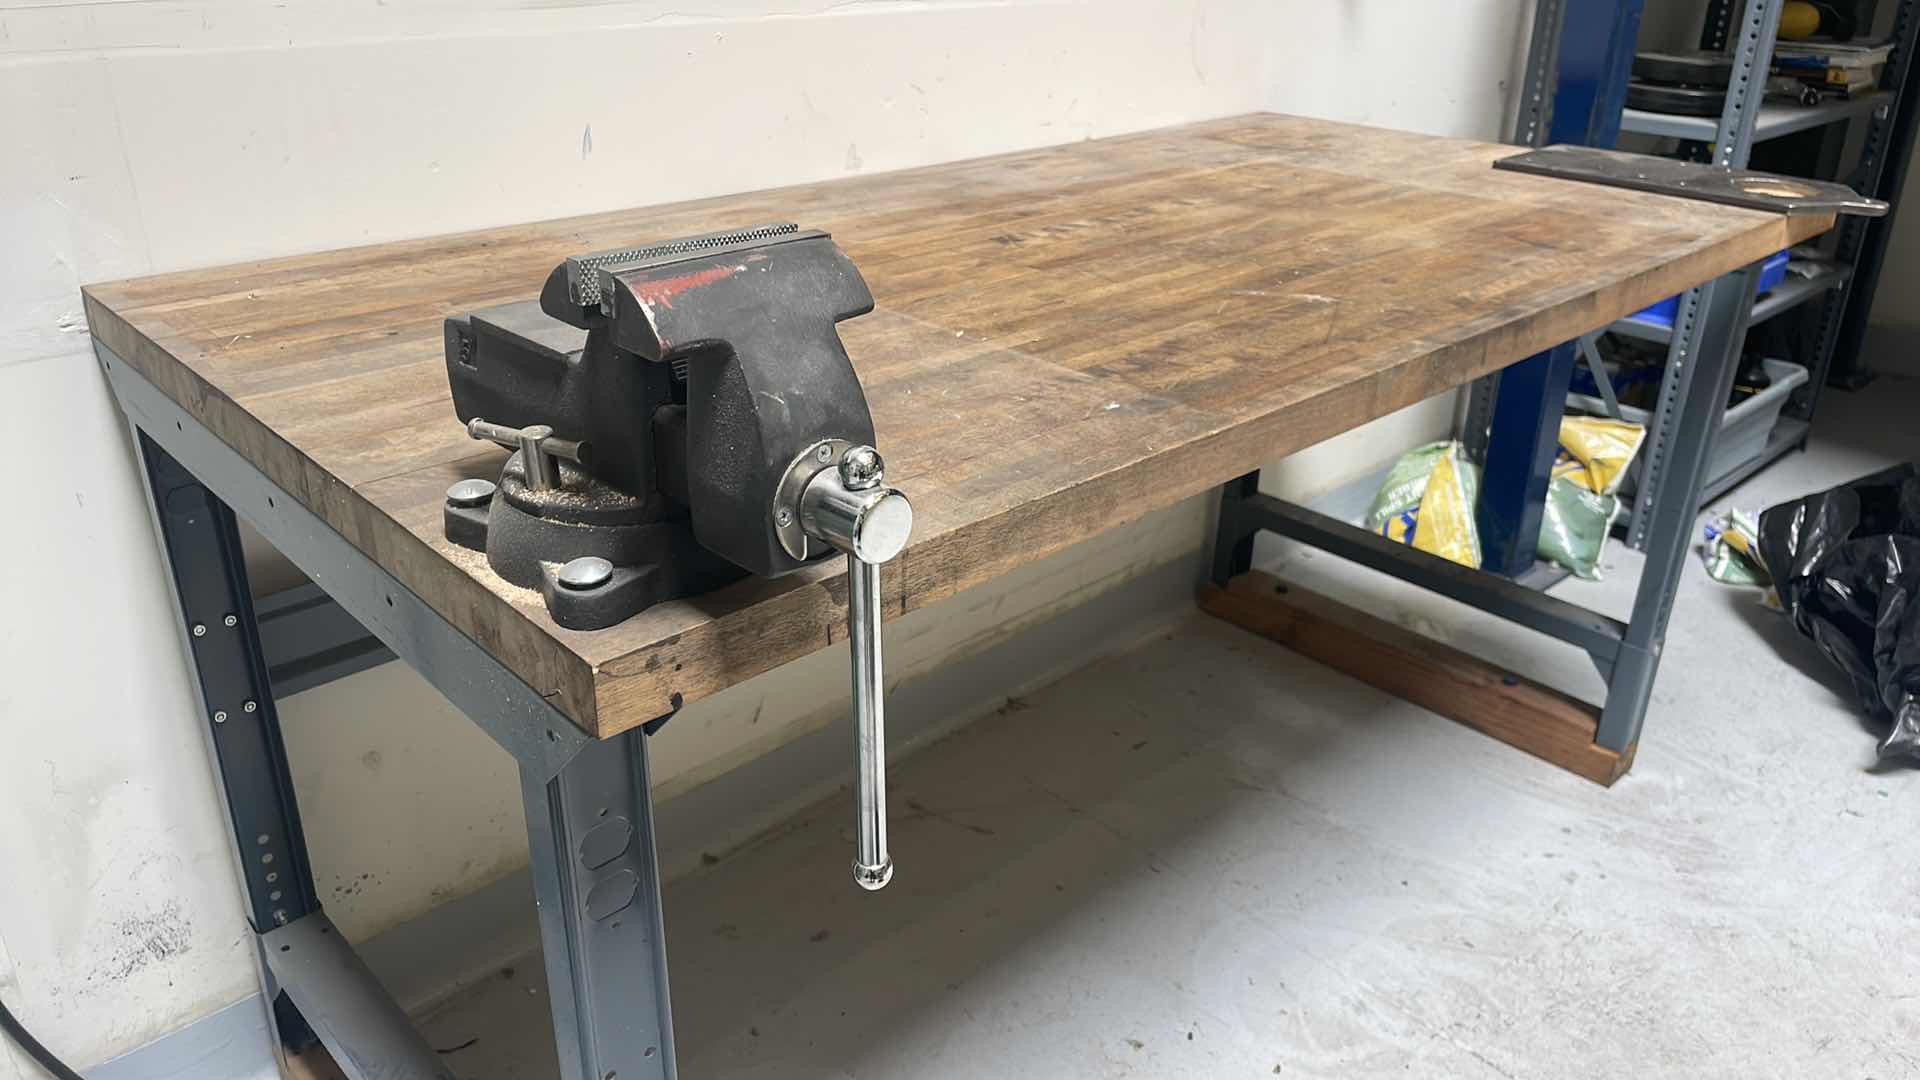 Photo 5 of WORK BENCH 72” x 36” WITH PALMGREN 5” VISE